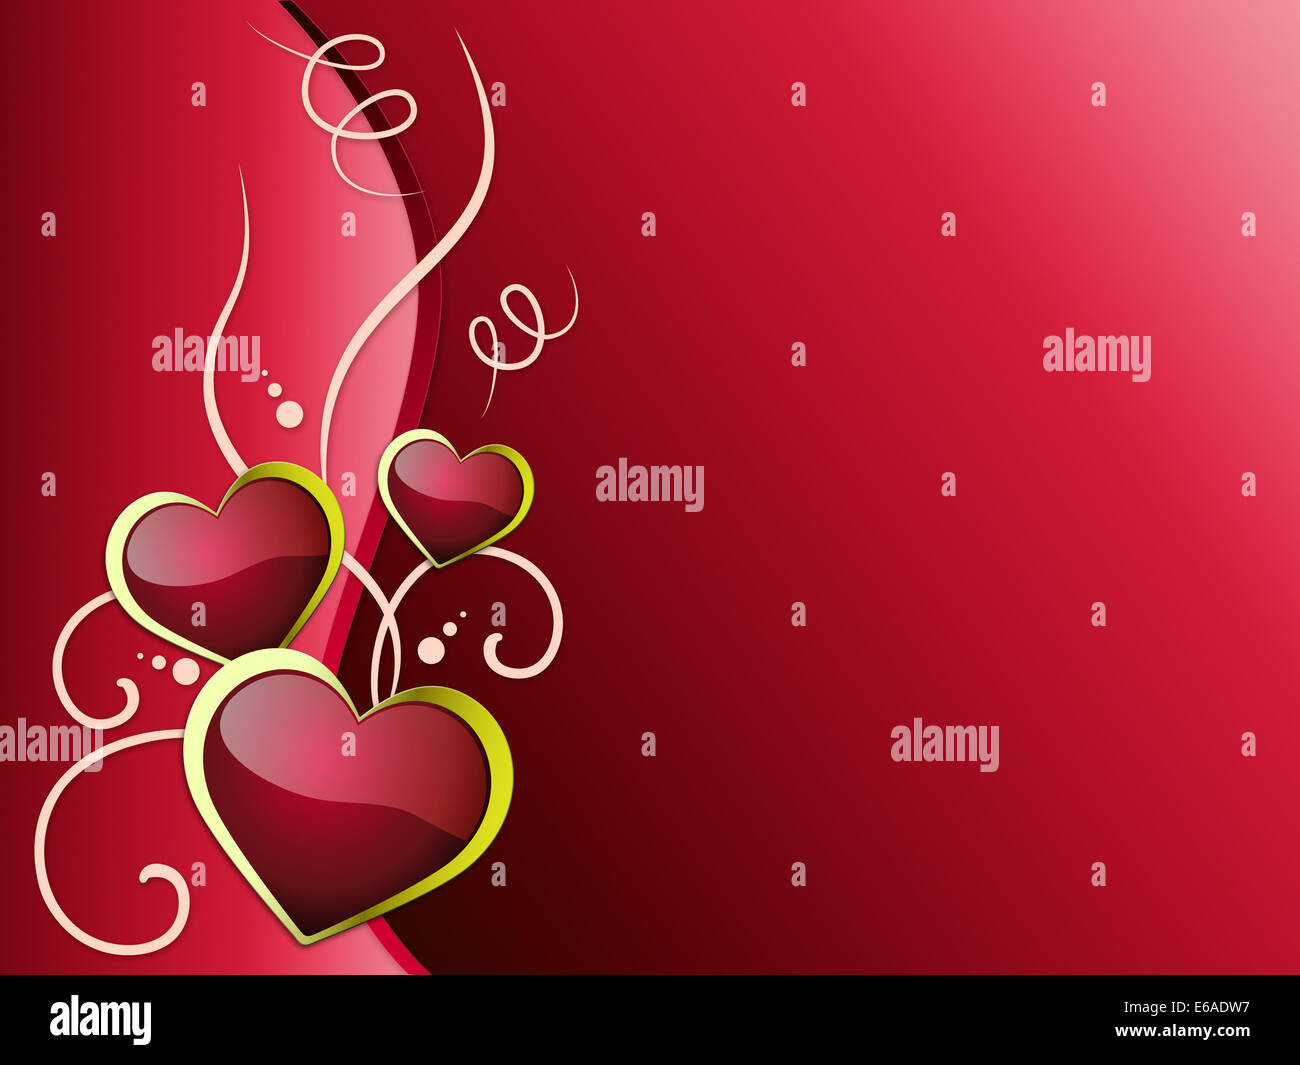 Hearts Background Meaning Romanticism  Passion And Love Stock Photo